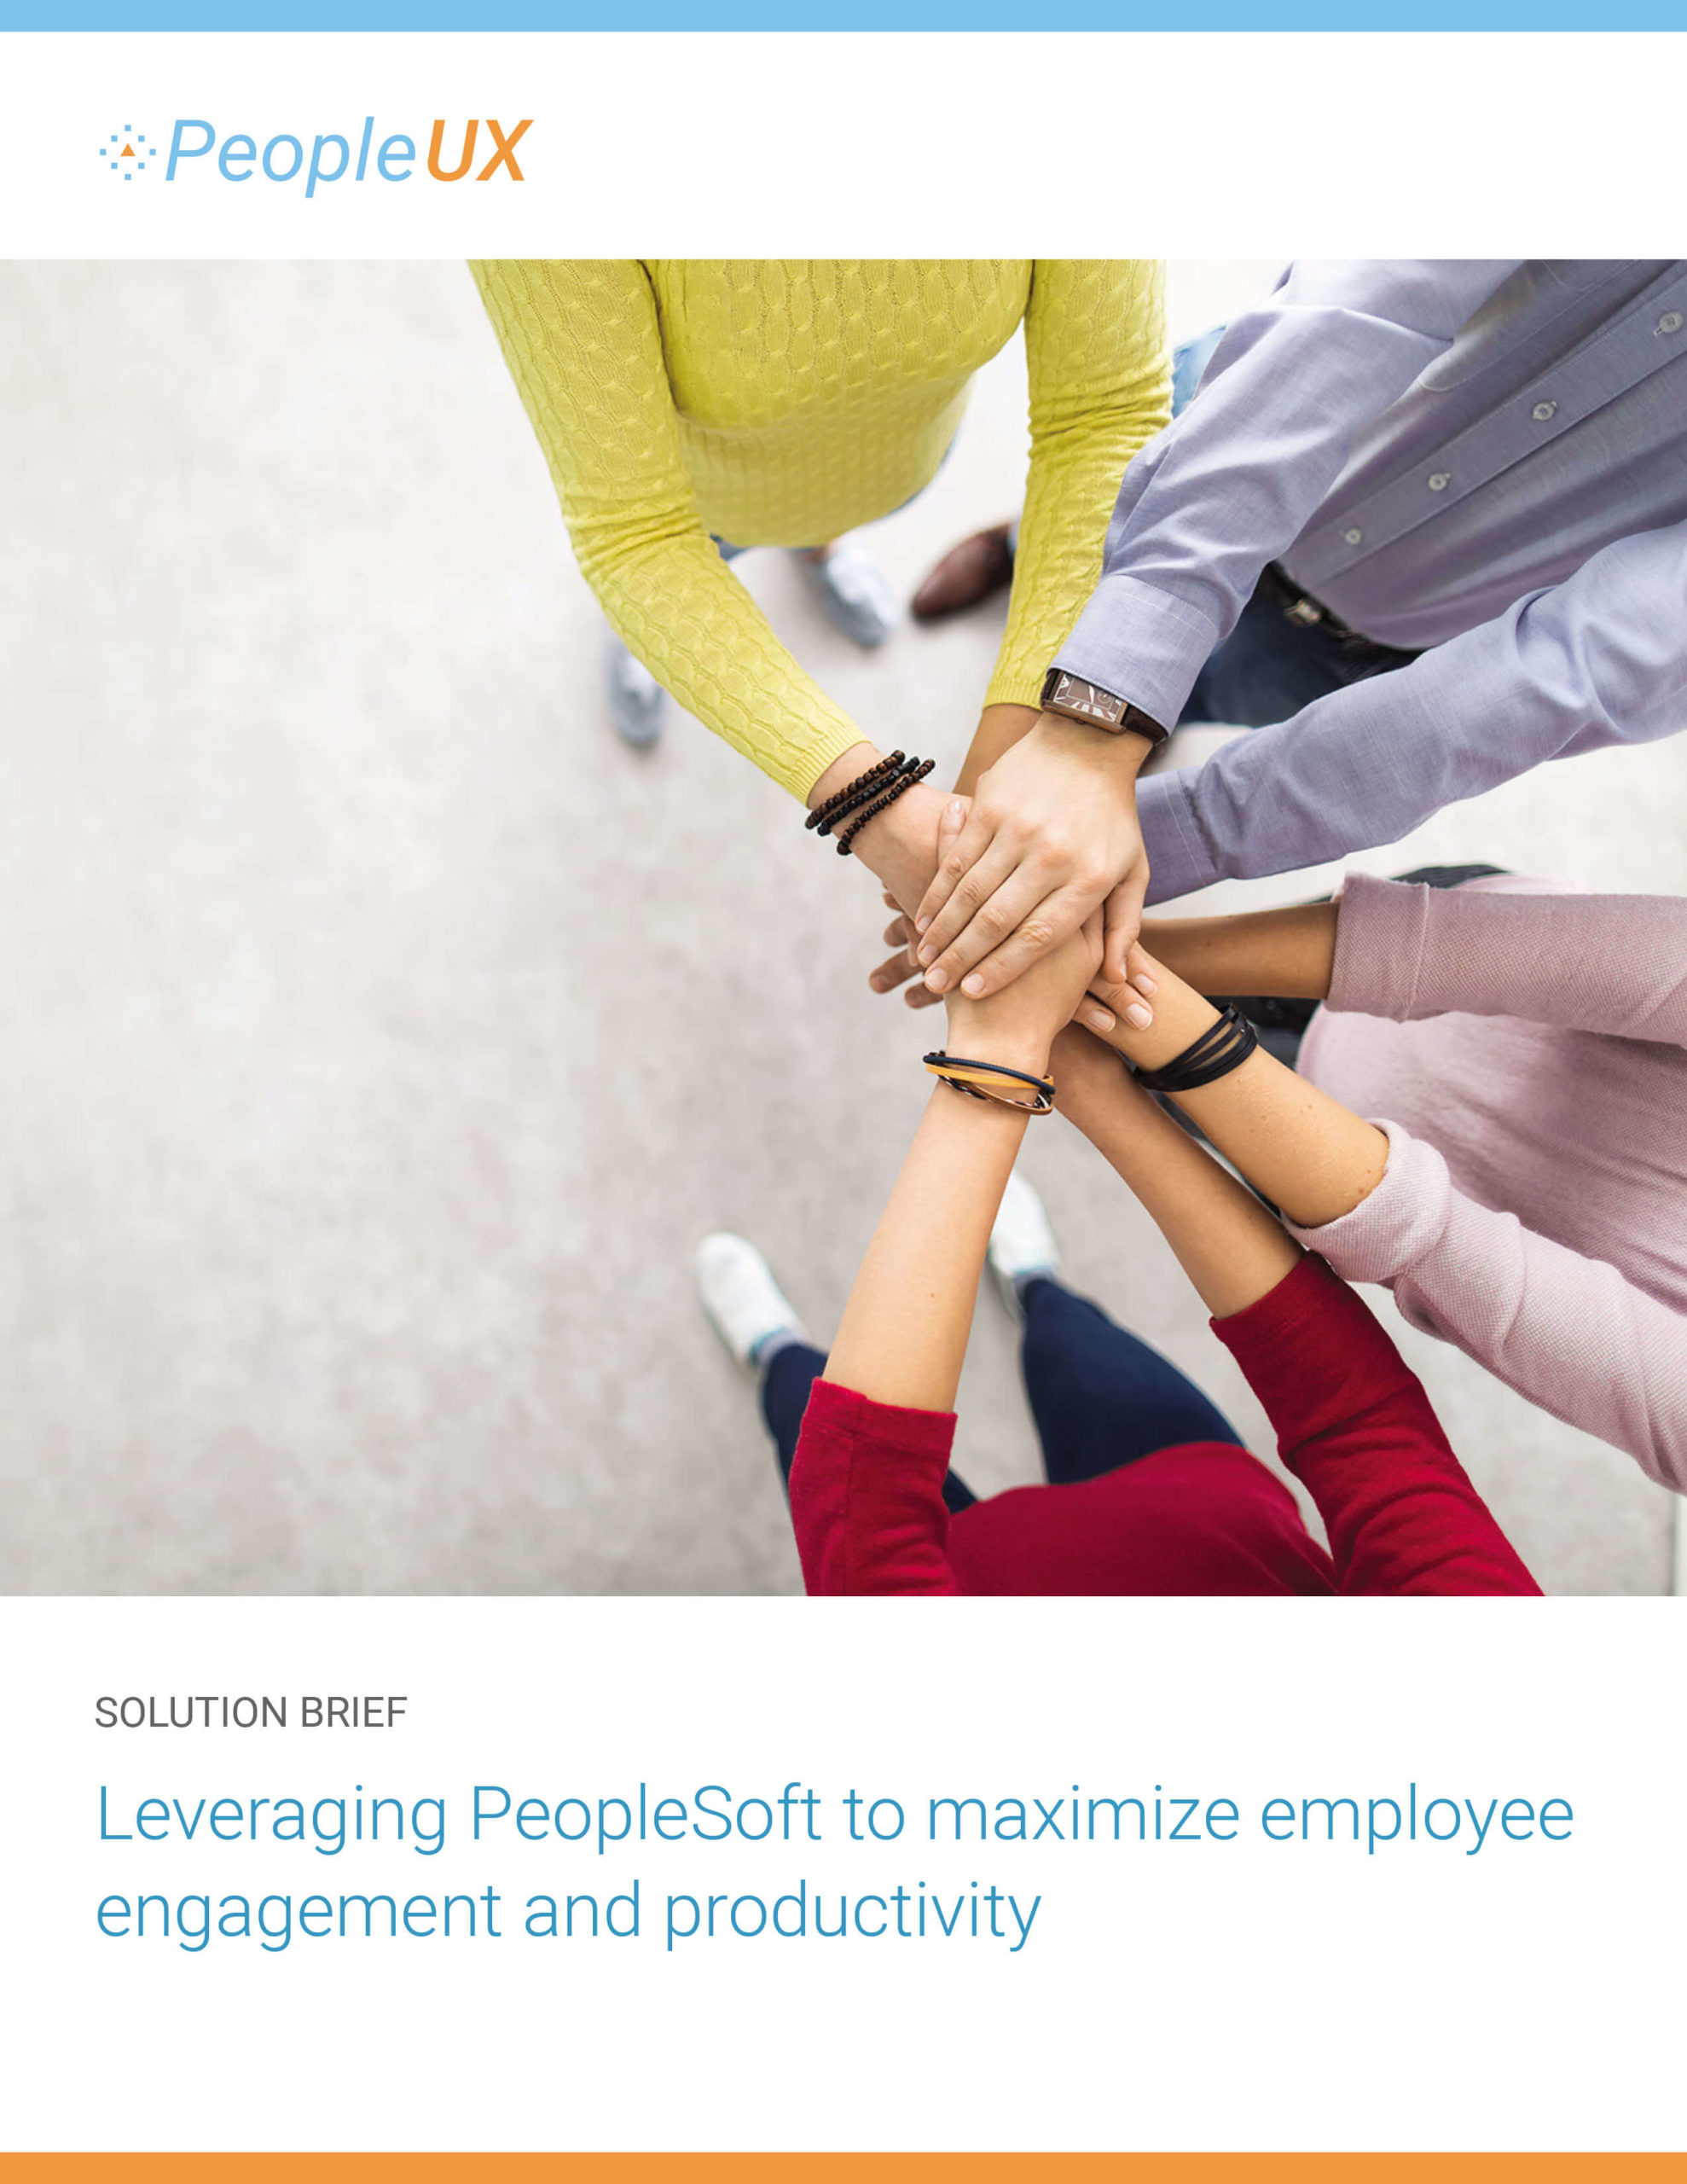 Leveraging PeopleSoft to maximize employee engagement and productivity